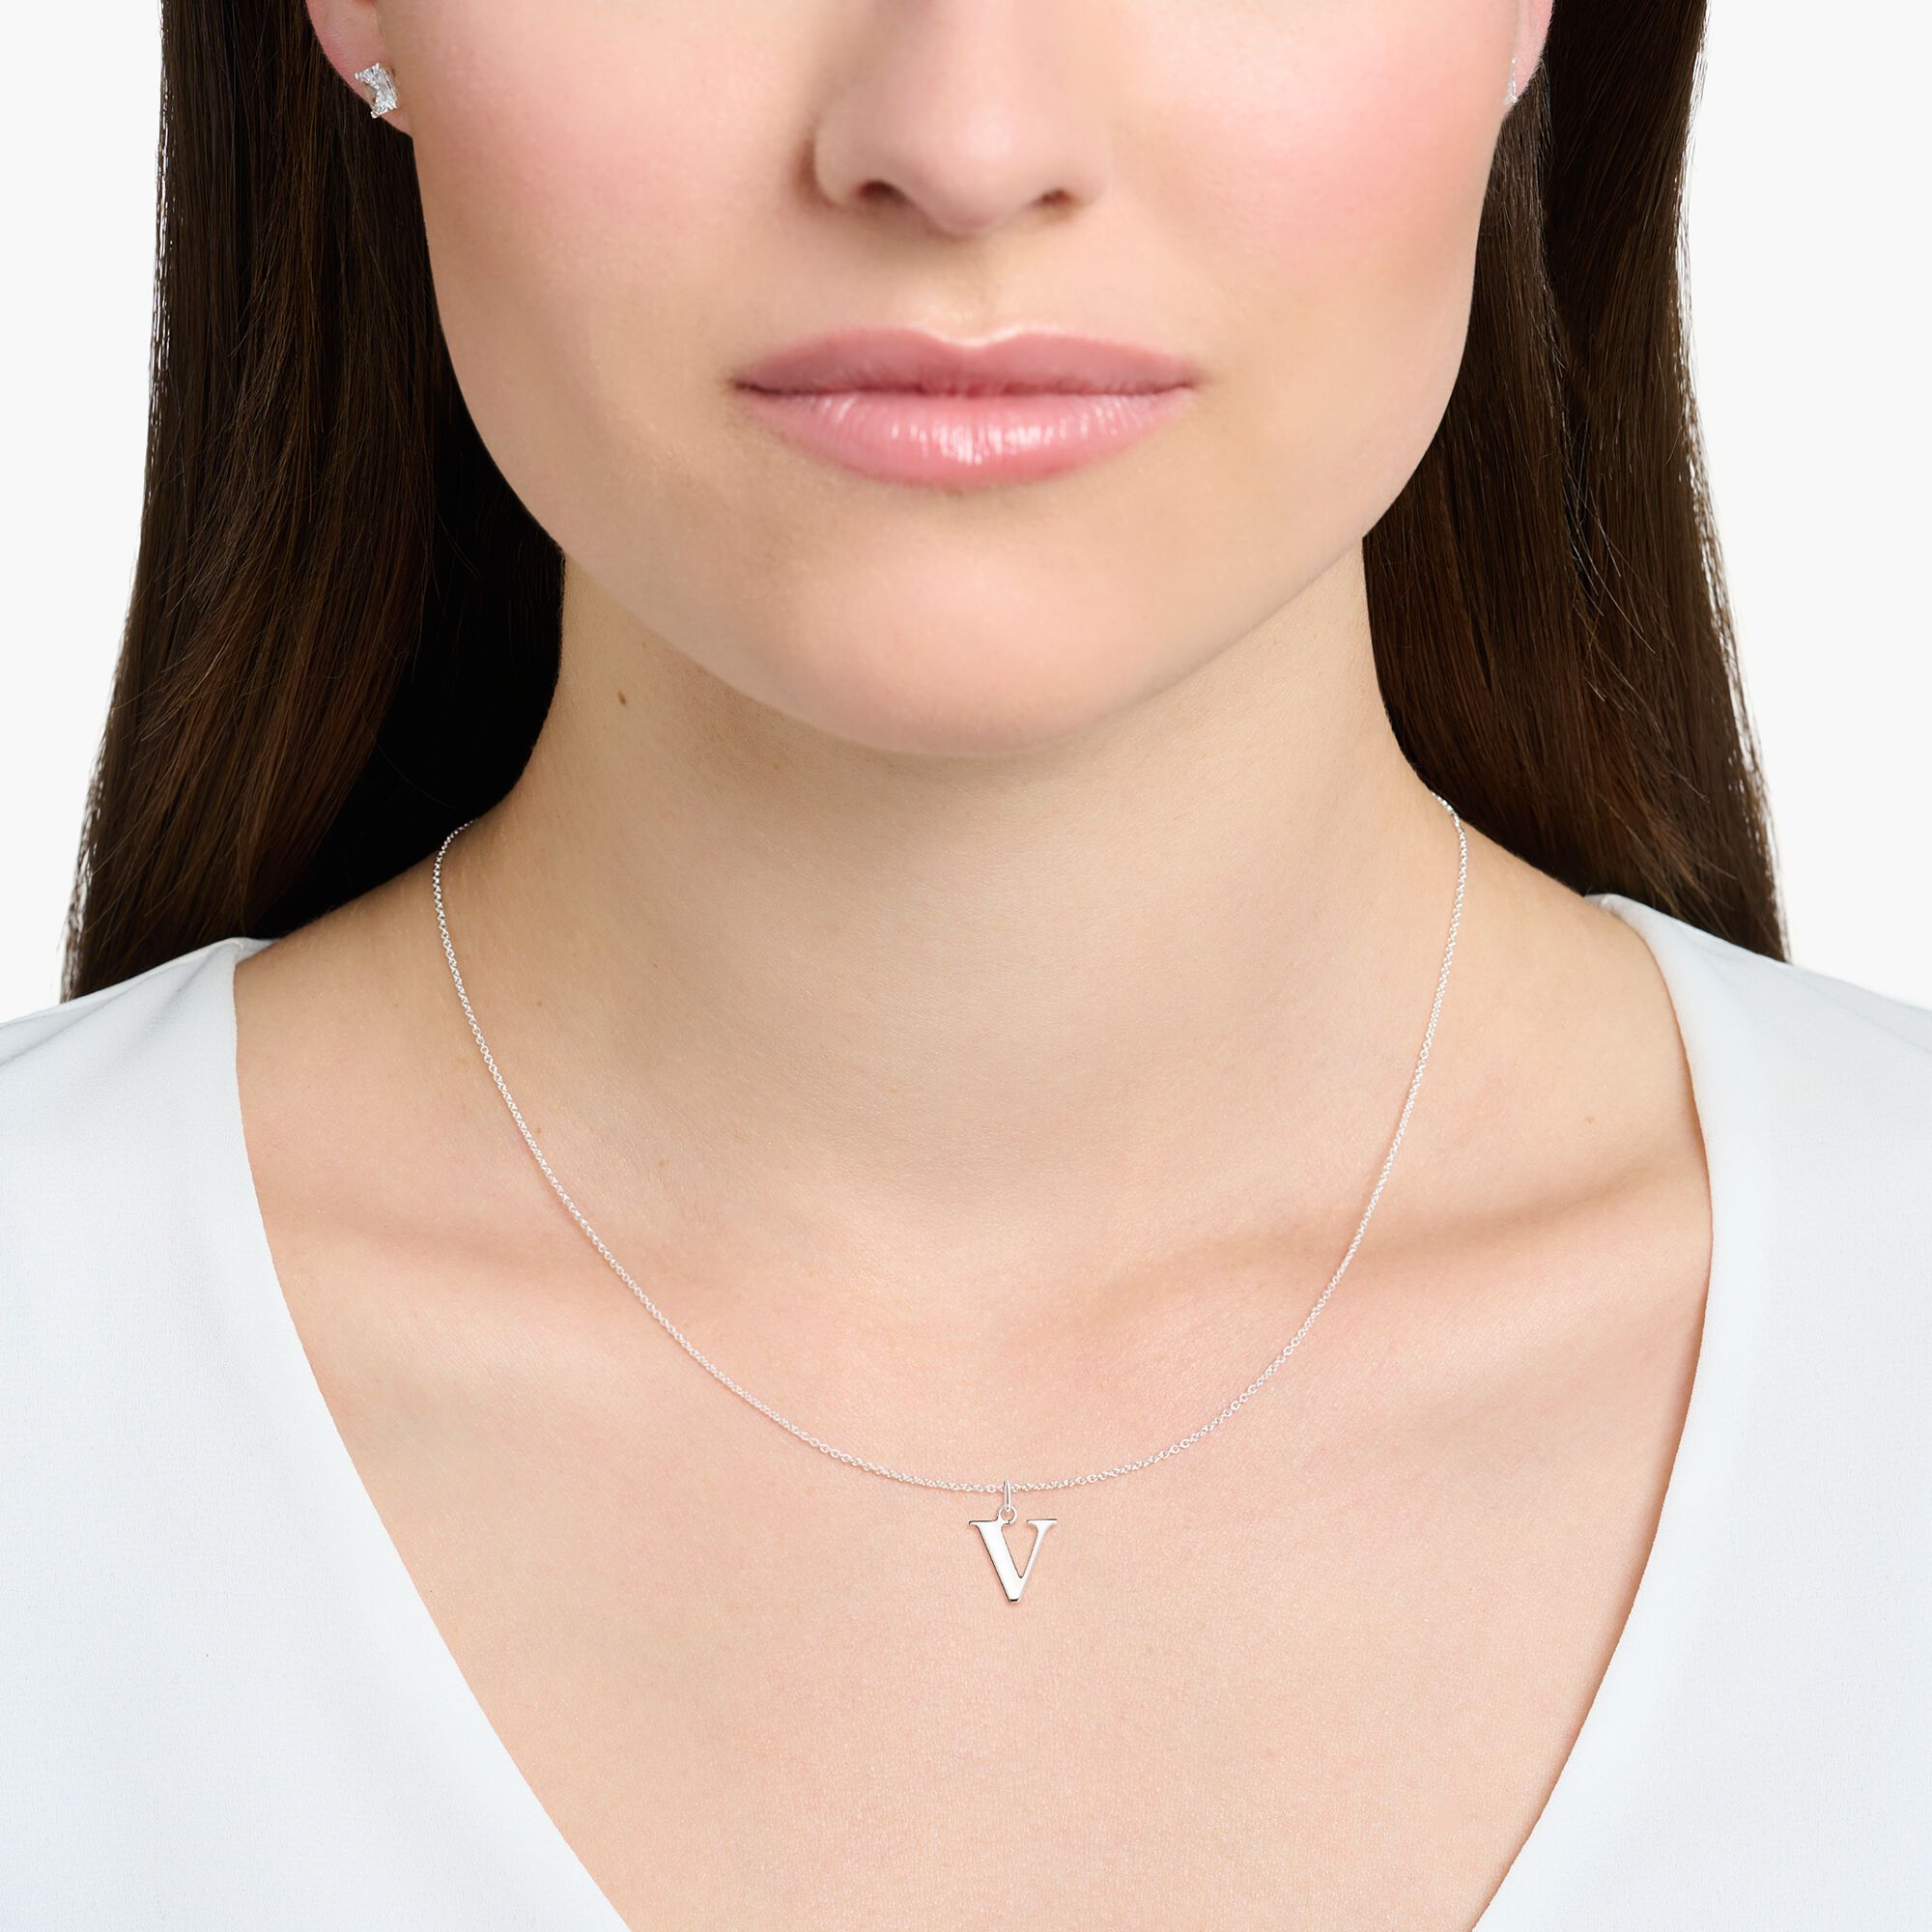 Silver necklace with letter-pendant V – THOMAS SABO